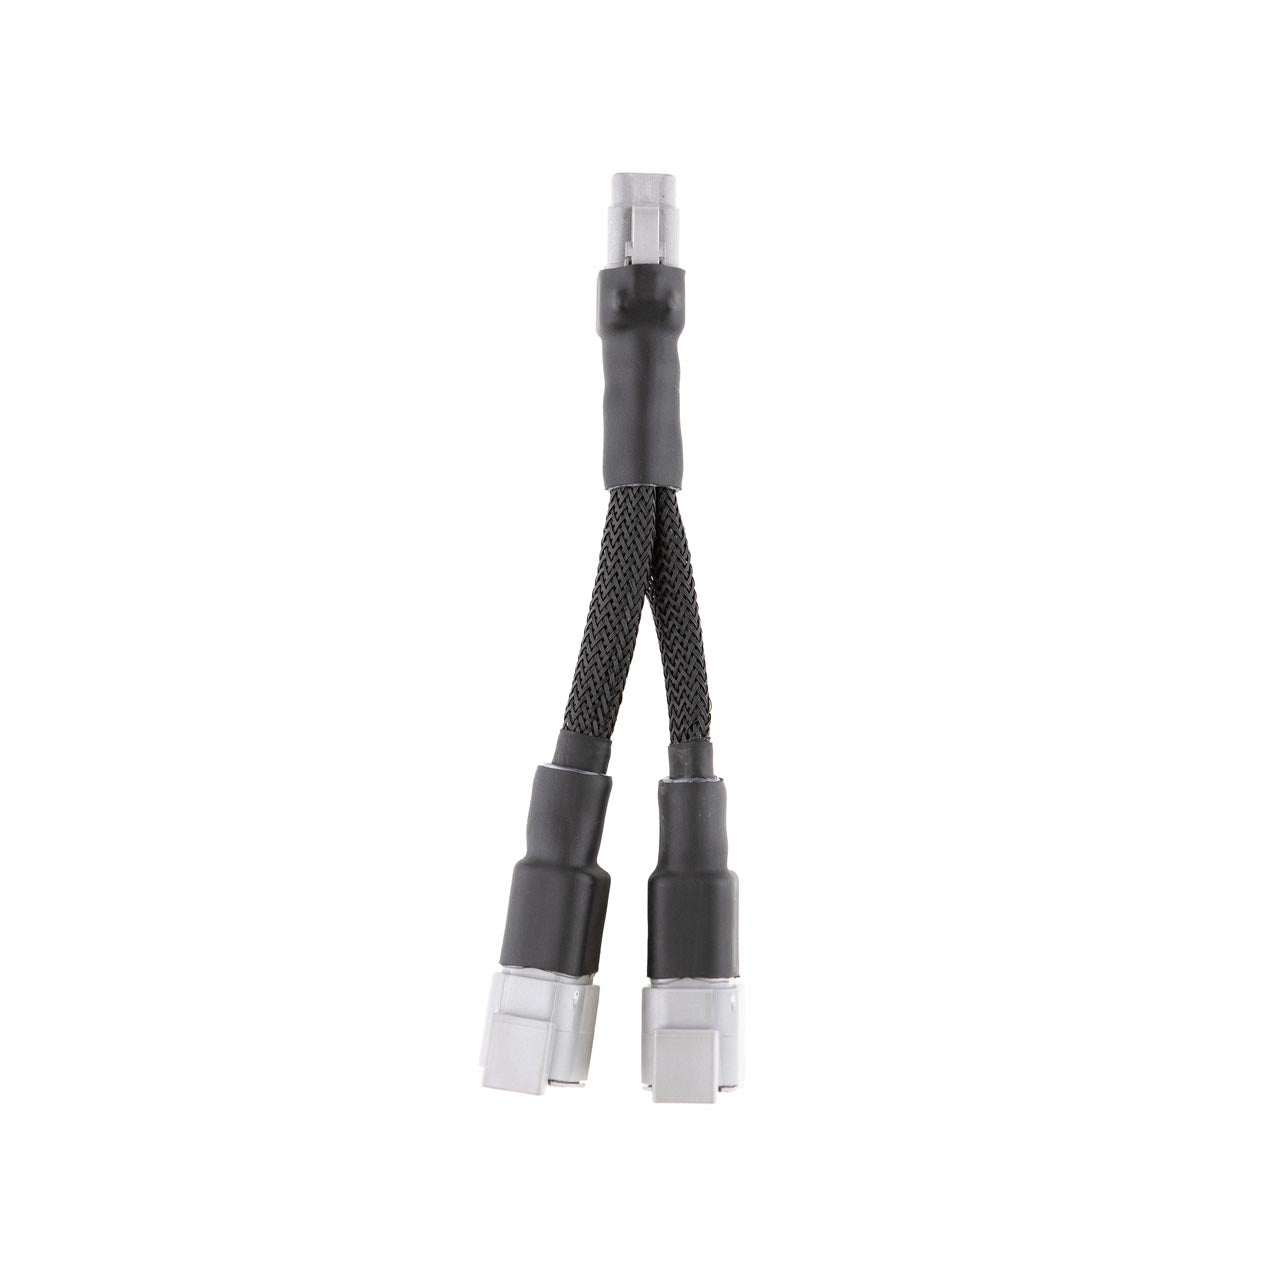 RN VISION P-LOO-CAN-Y-ADAPTER Y-адаптер CAN Photo-2 